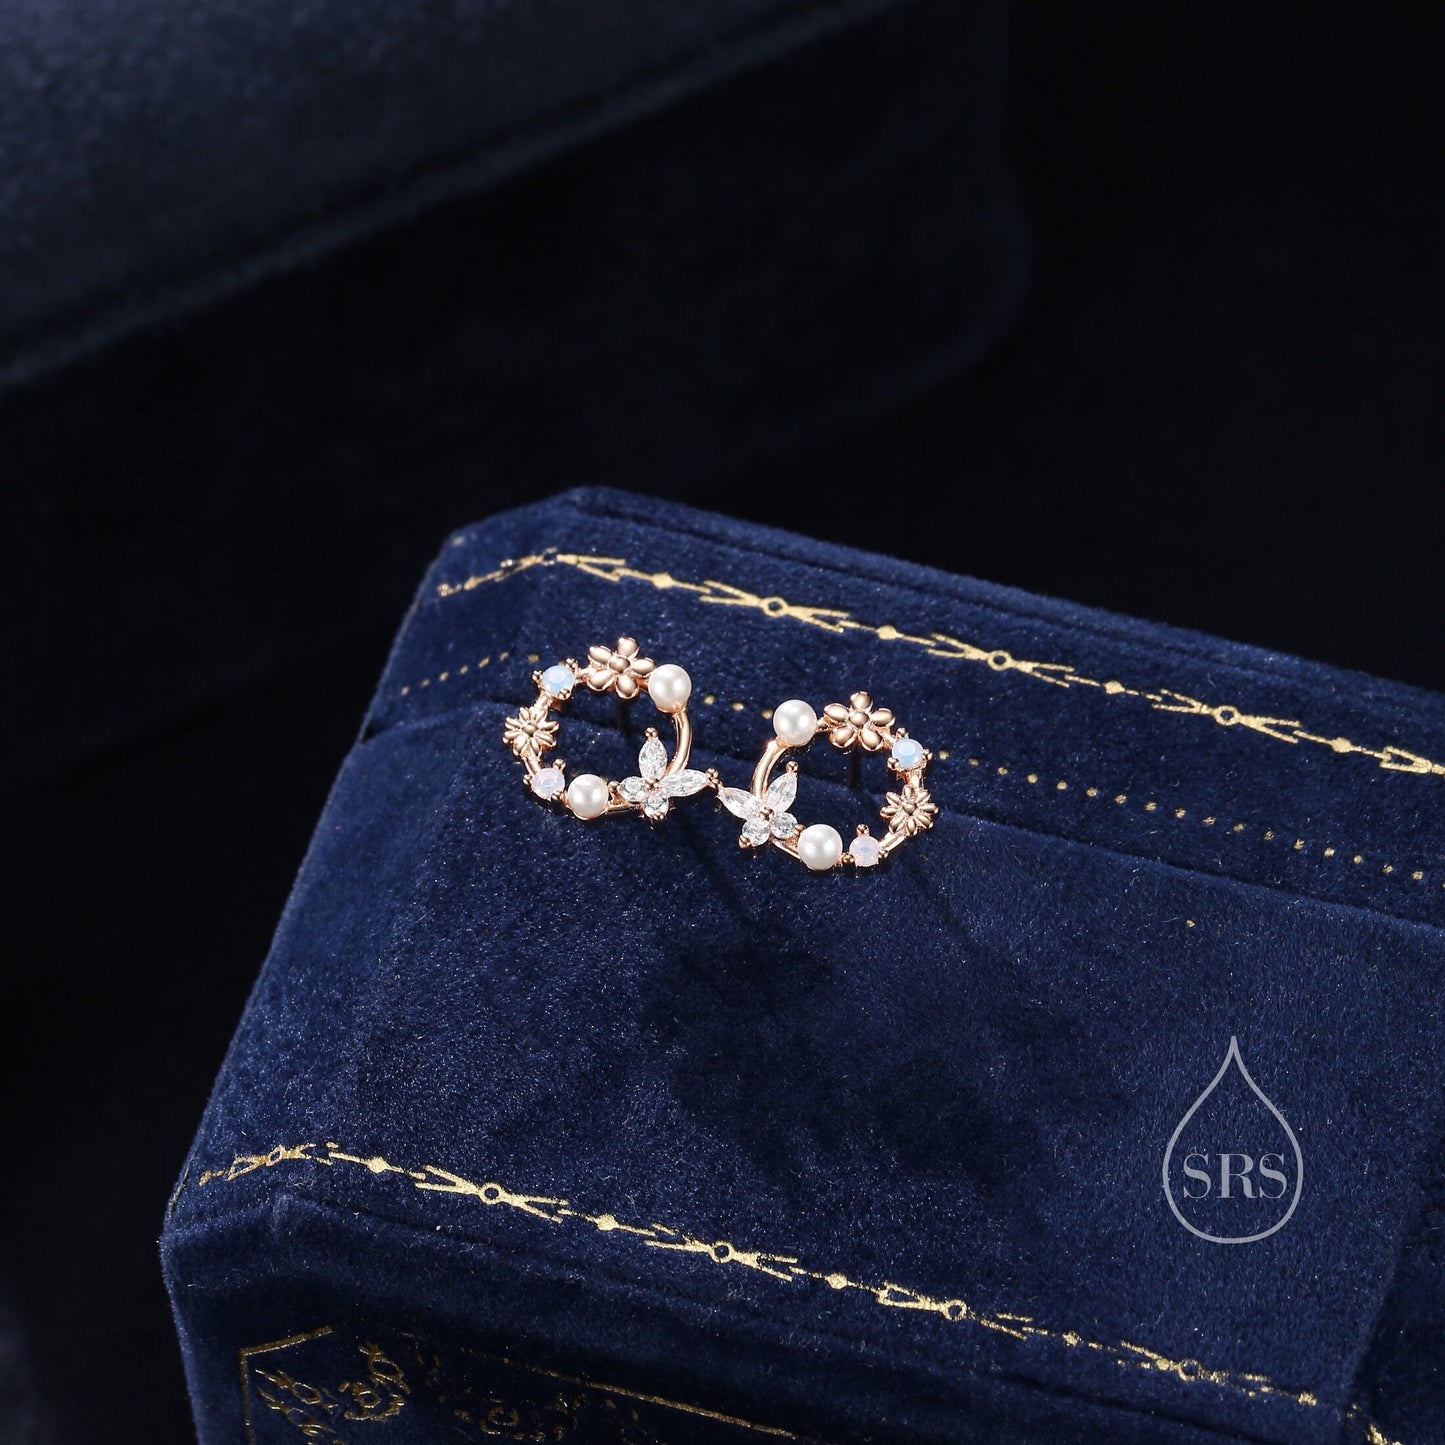 Sterling Silver Tiny Flower Wreath Stud Earrings - Silver or Gold or Rose Gold, CZ Circle Flower and Butterfly Stud Earrings